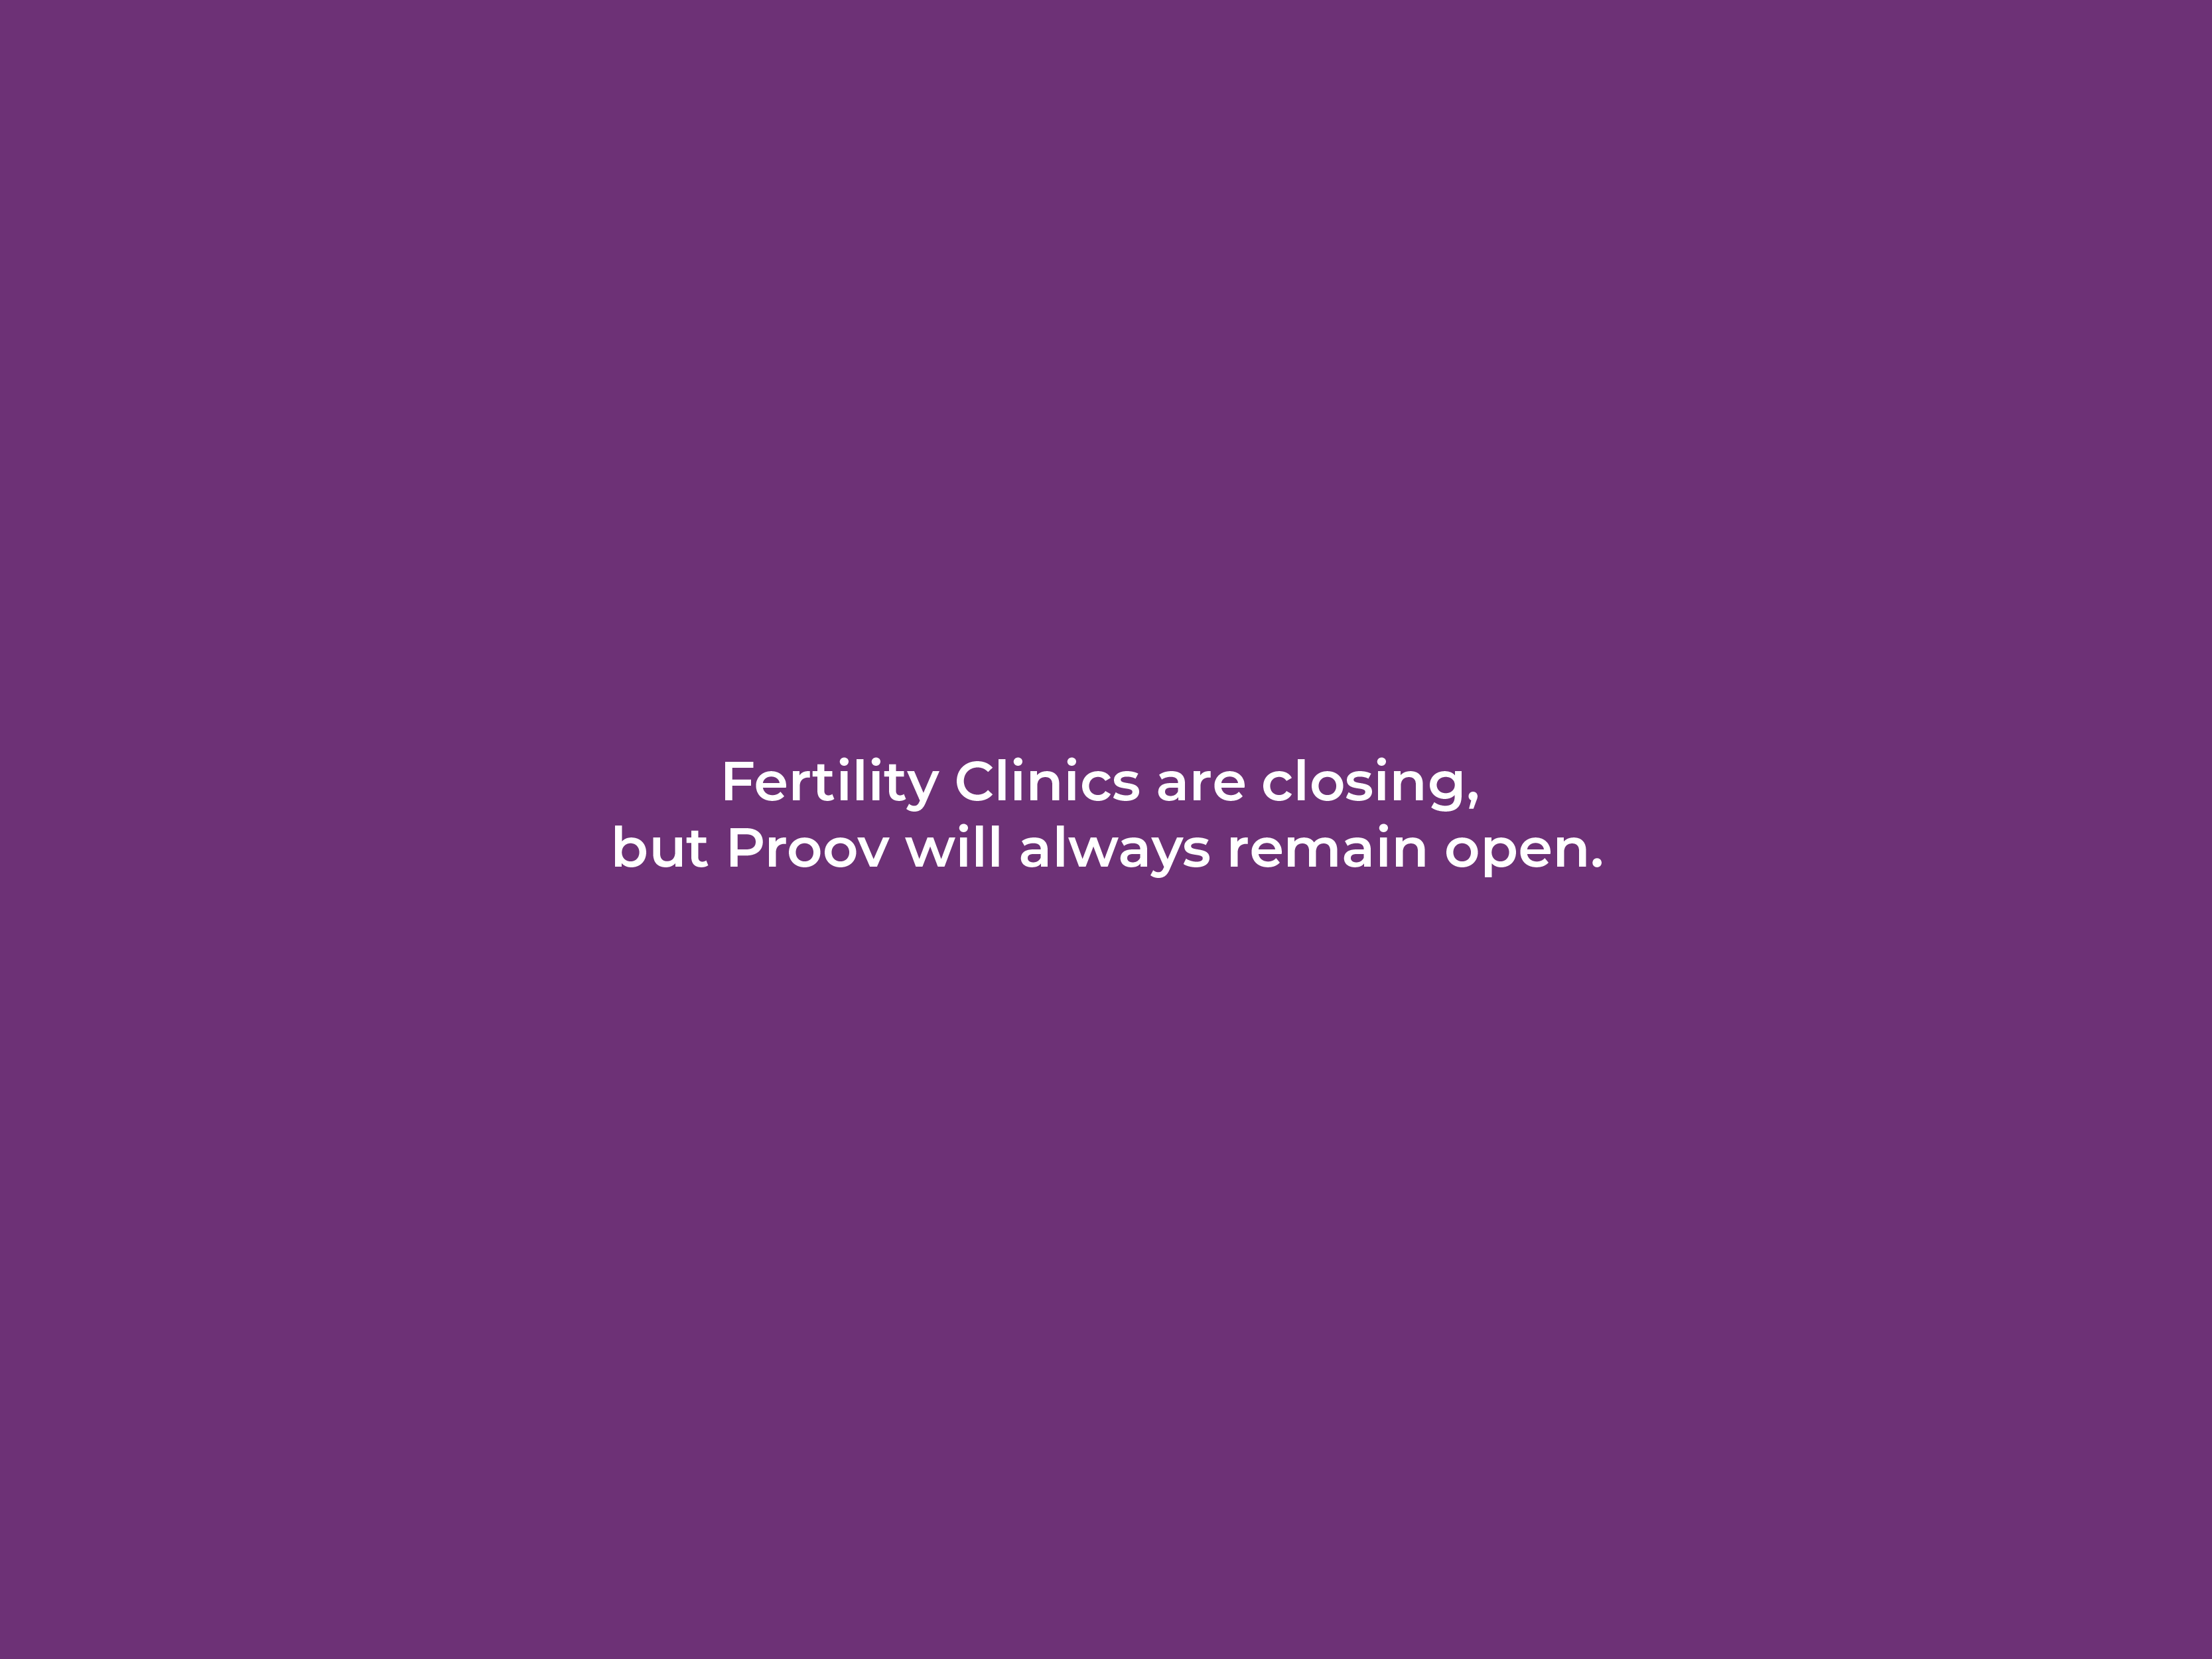 Fertility Clinics are Closed – Now What?